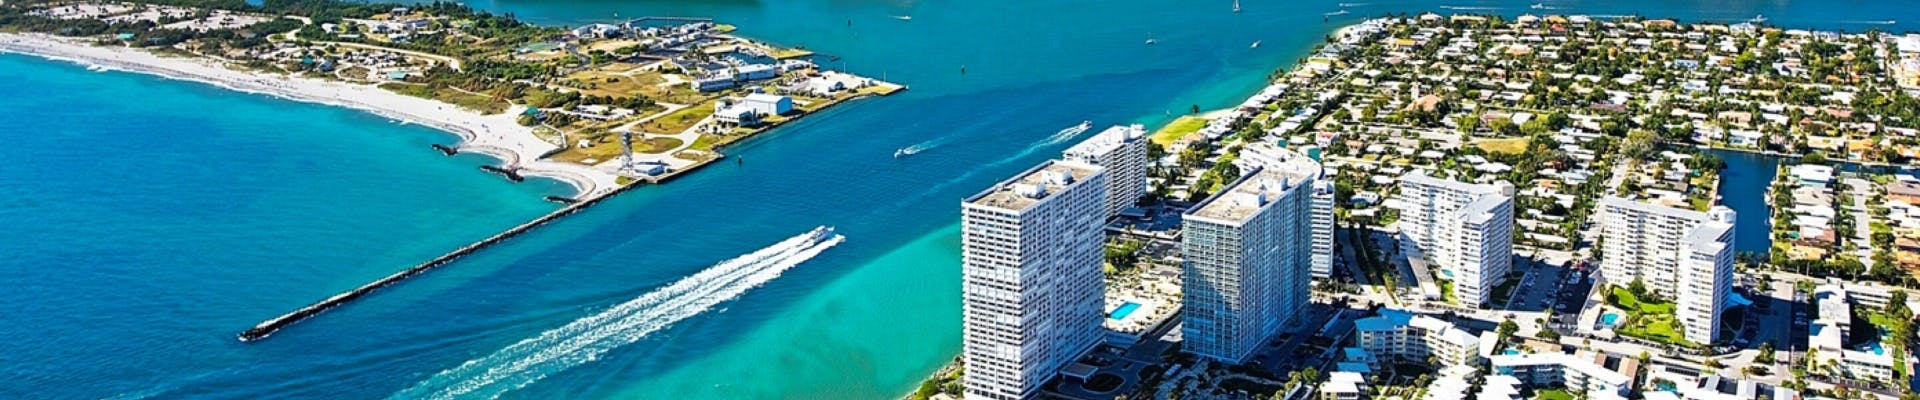 Yachting in Fort Lauderdale, FL